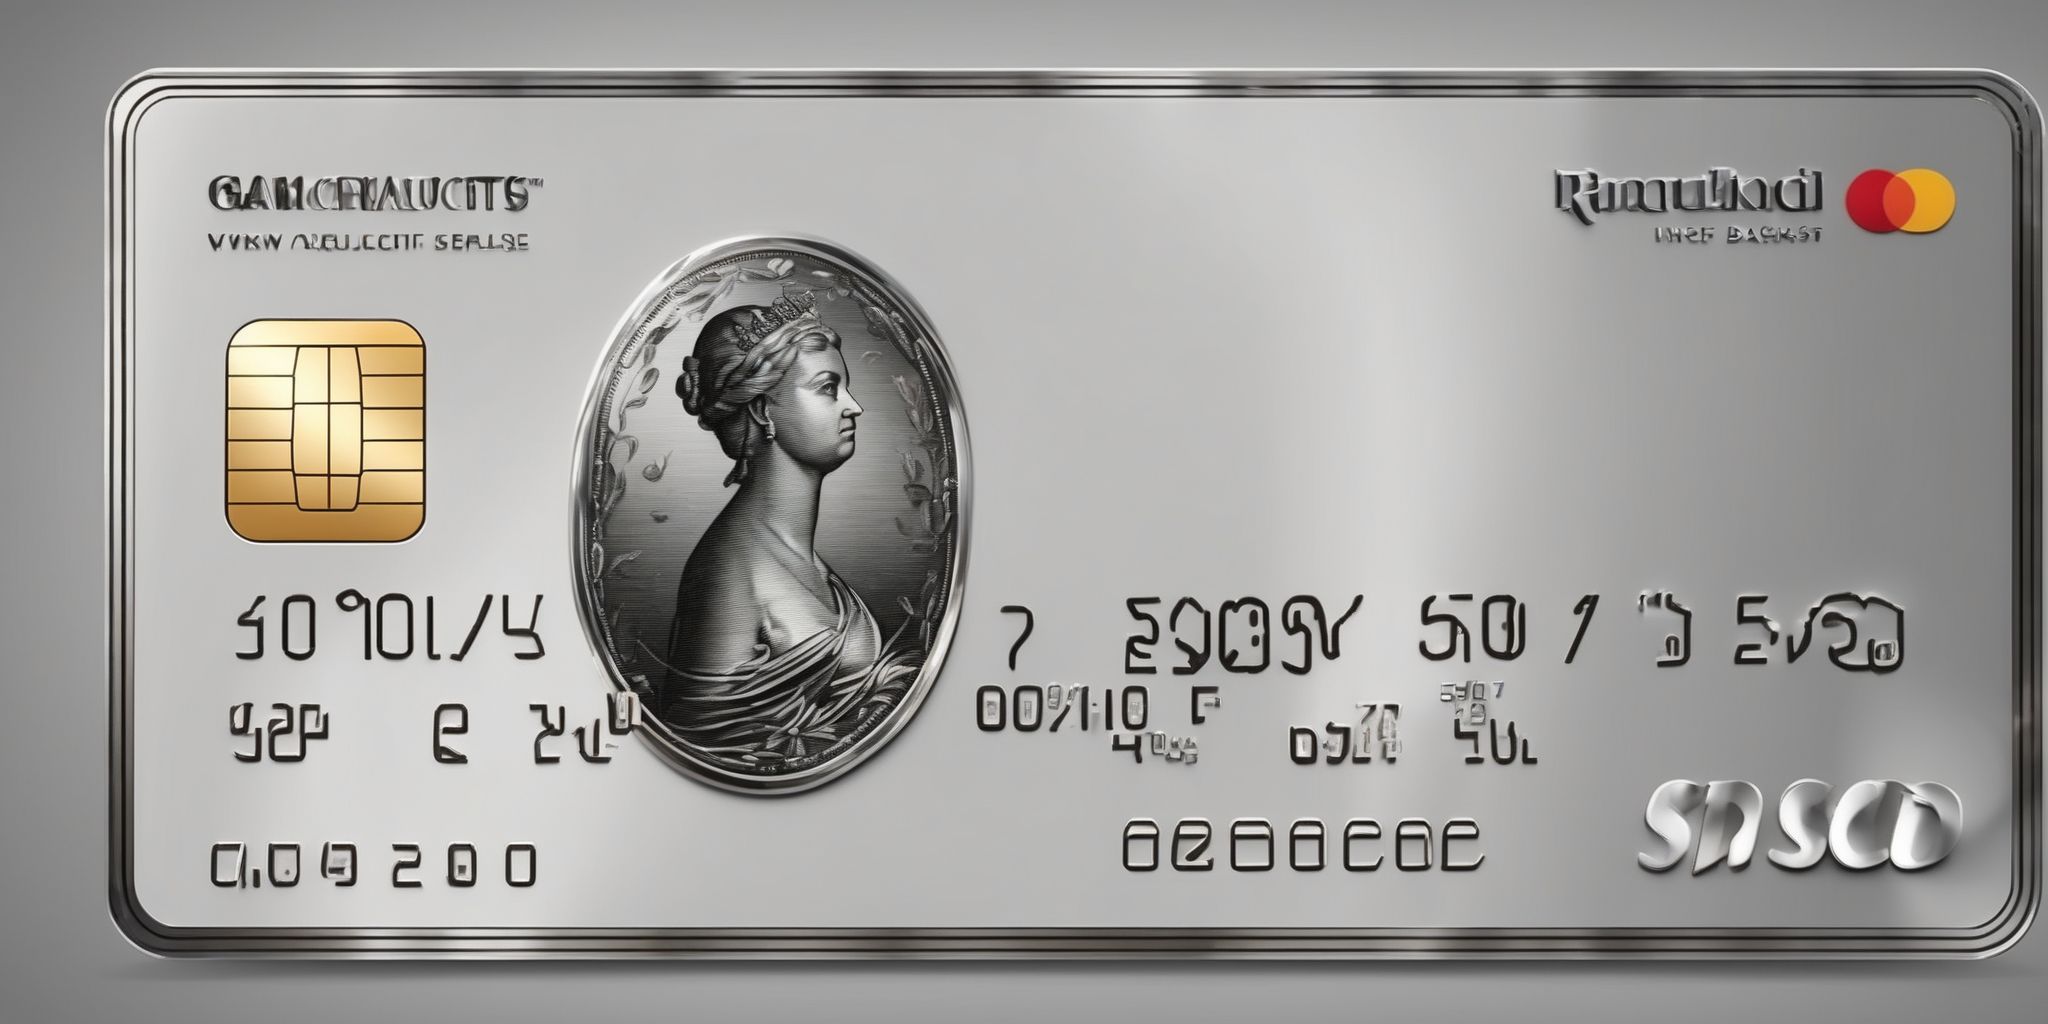 Credit card  in realistic, photographic style